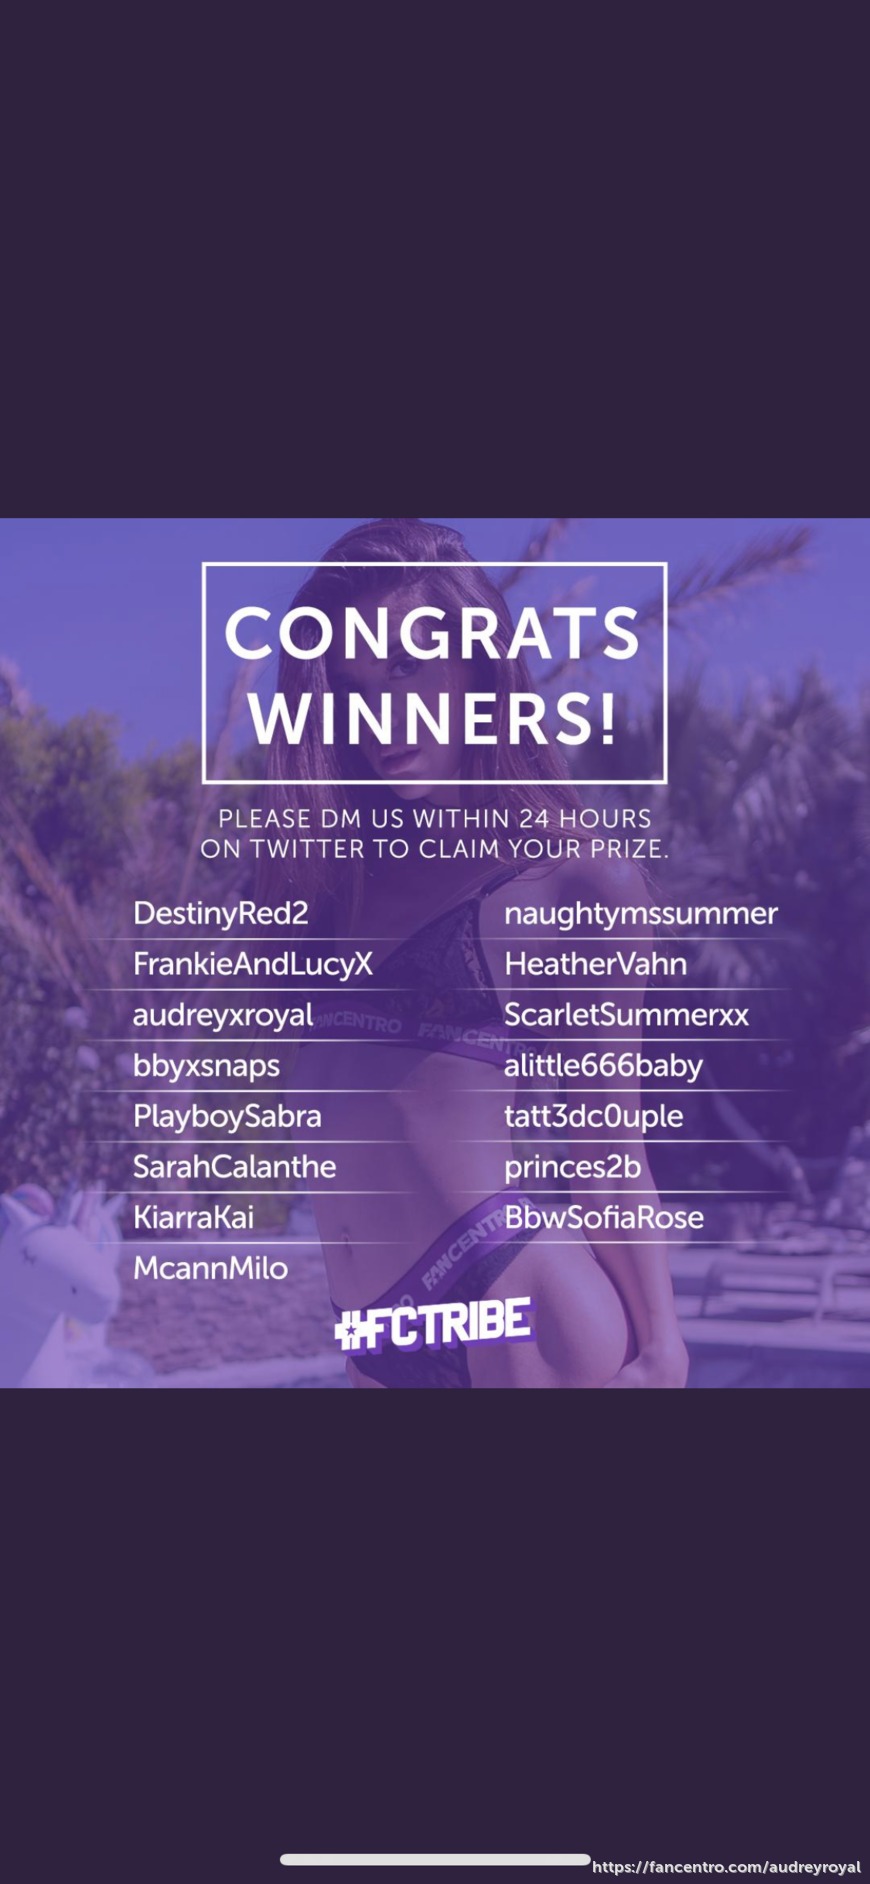 Yay I'm so happy to be one of the Winners! - AudreyRoyal - Fancentro